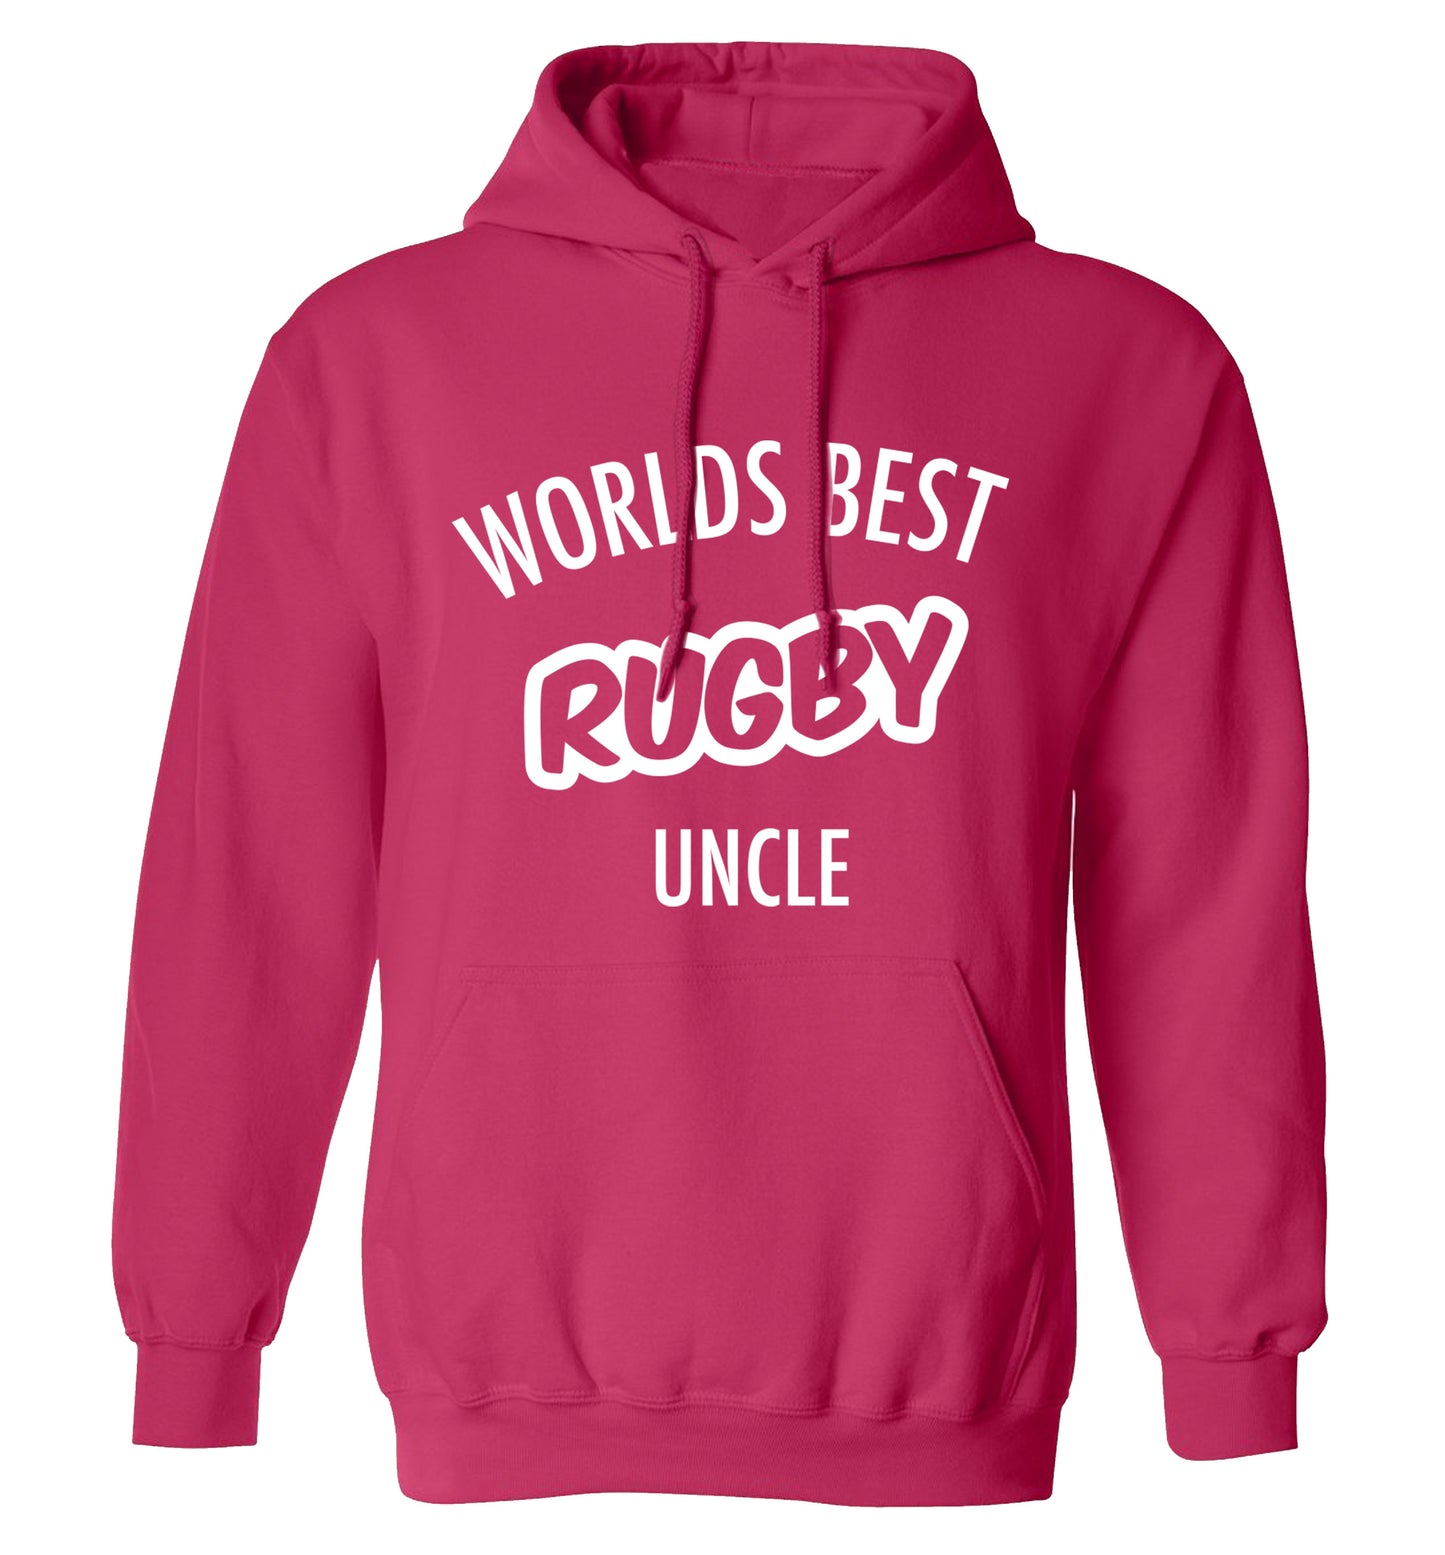 Worlds best rugby uncle adults unisex pink hoodie 2XL